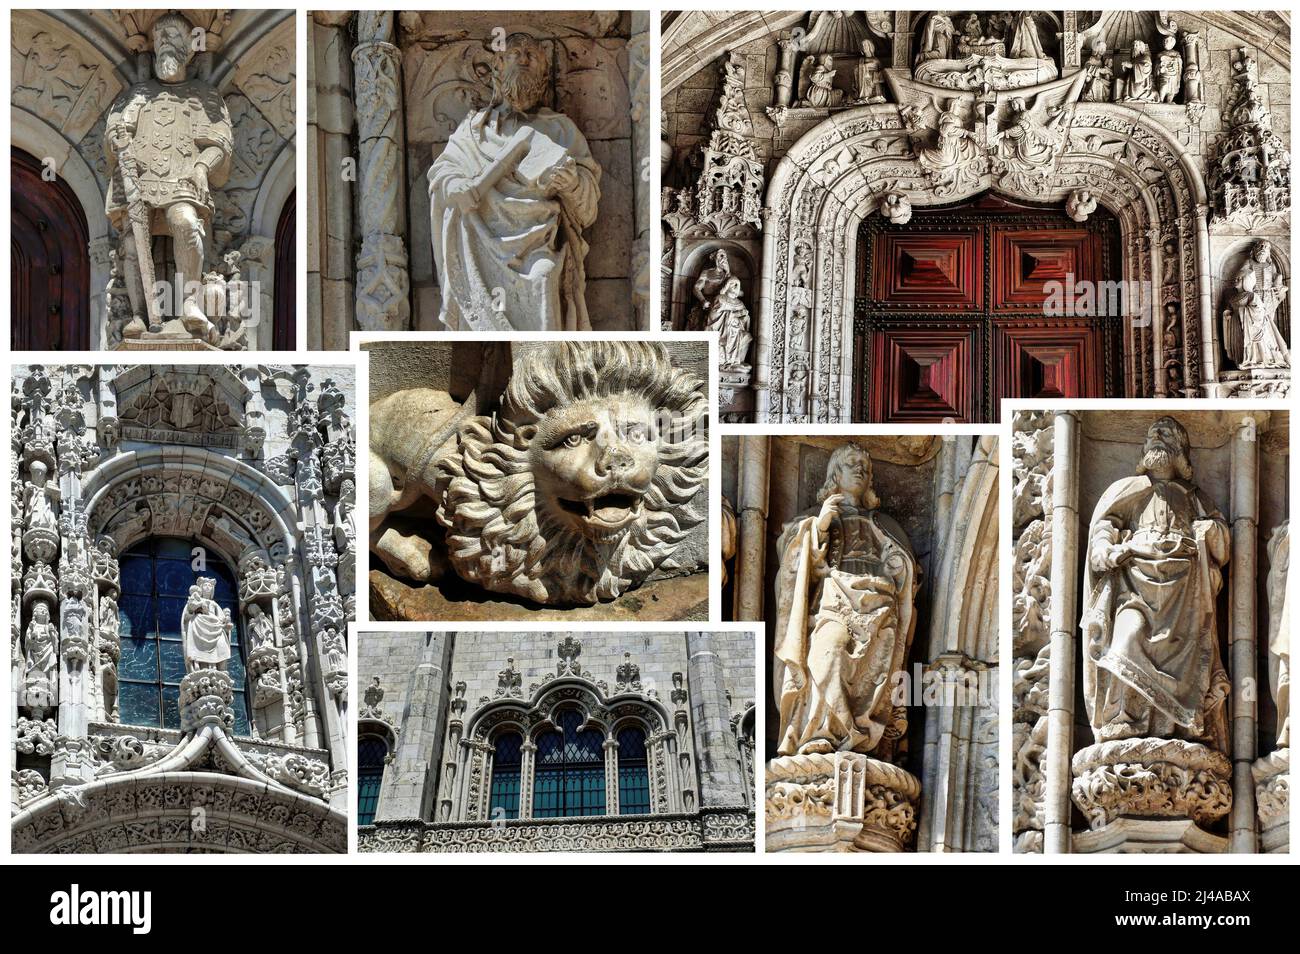 Some architectural details of the Jerónimos Monastery is one of the most important examples of the Portuguese Manueline architectural style in Lisbon. Stock Photo